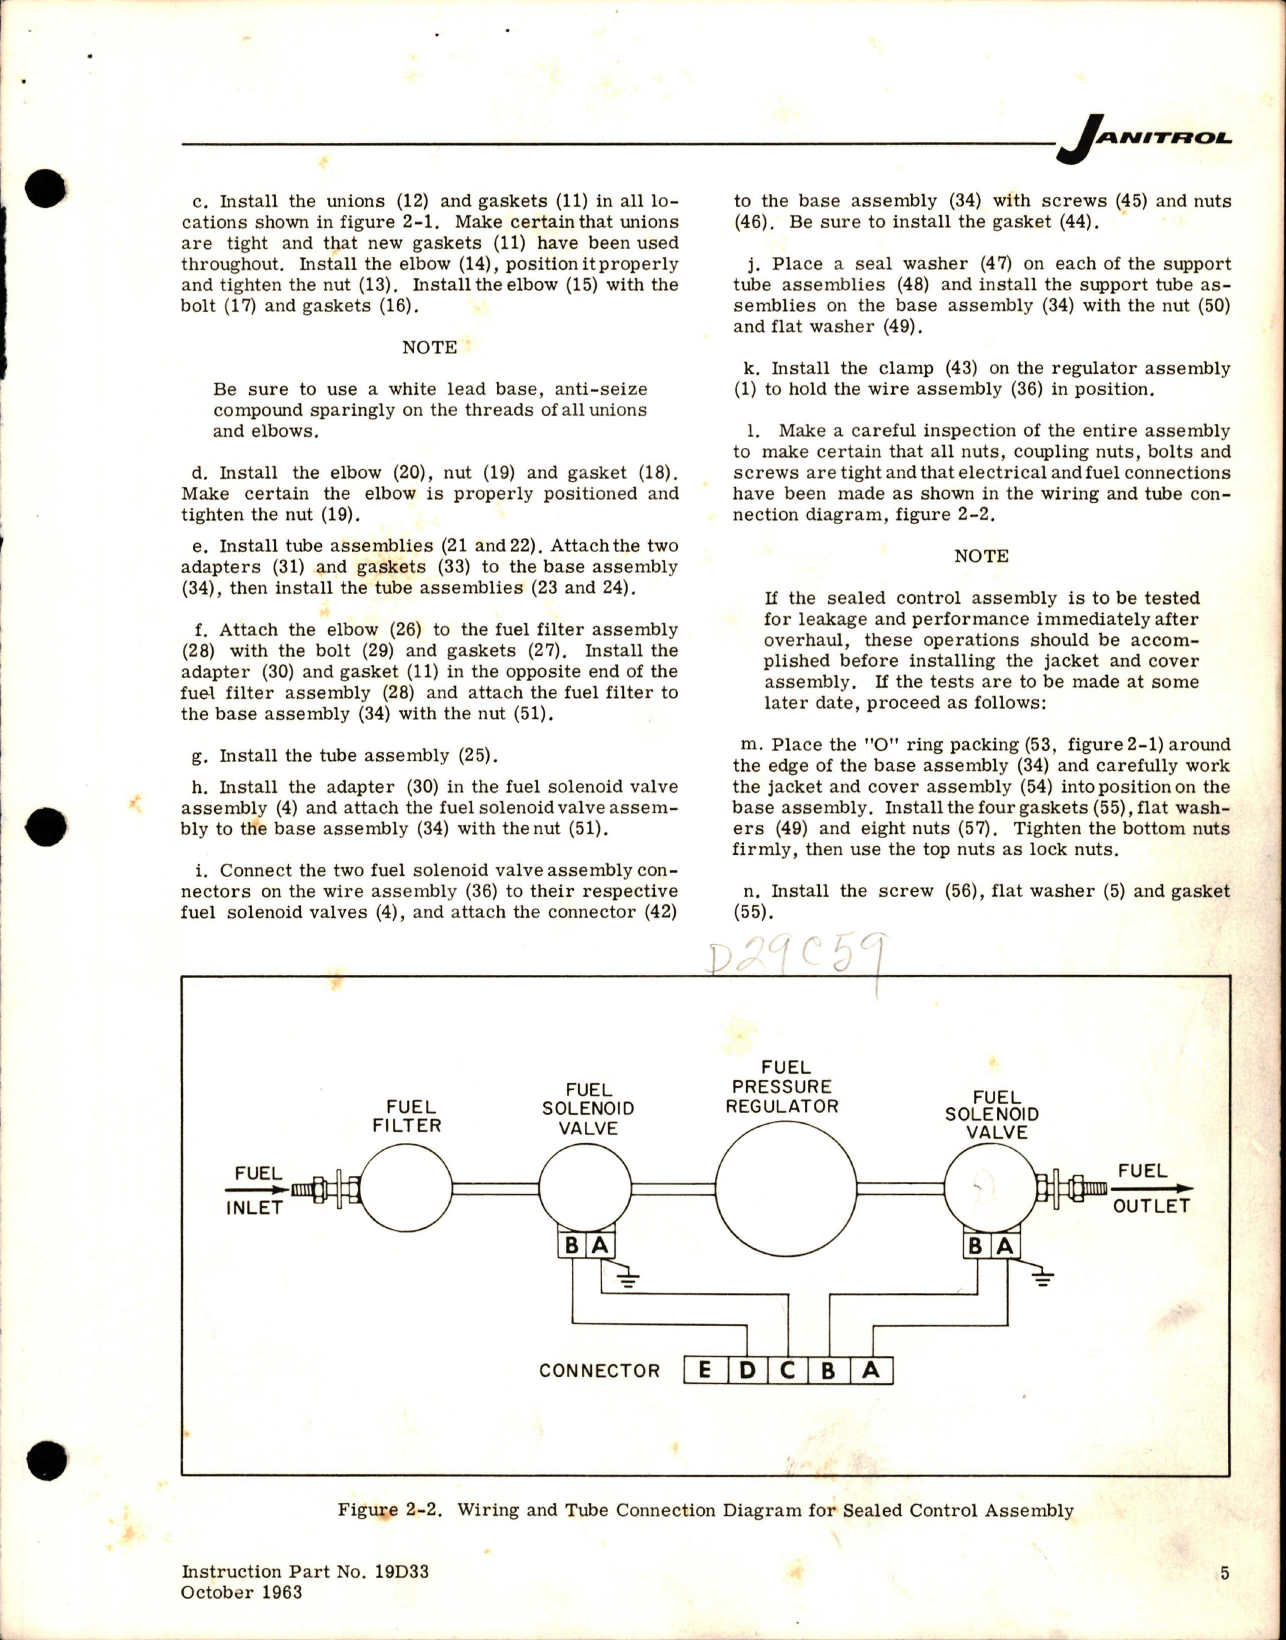 Sample page 5 from AirCorps Library document: Maintenance Instructions for Sealed Control Assembly - Part D29C59